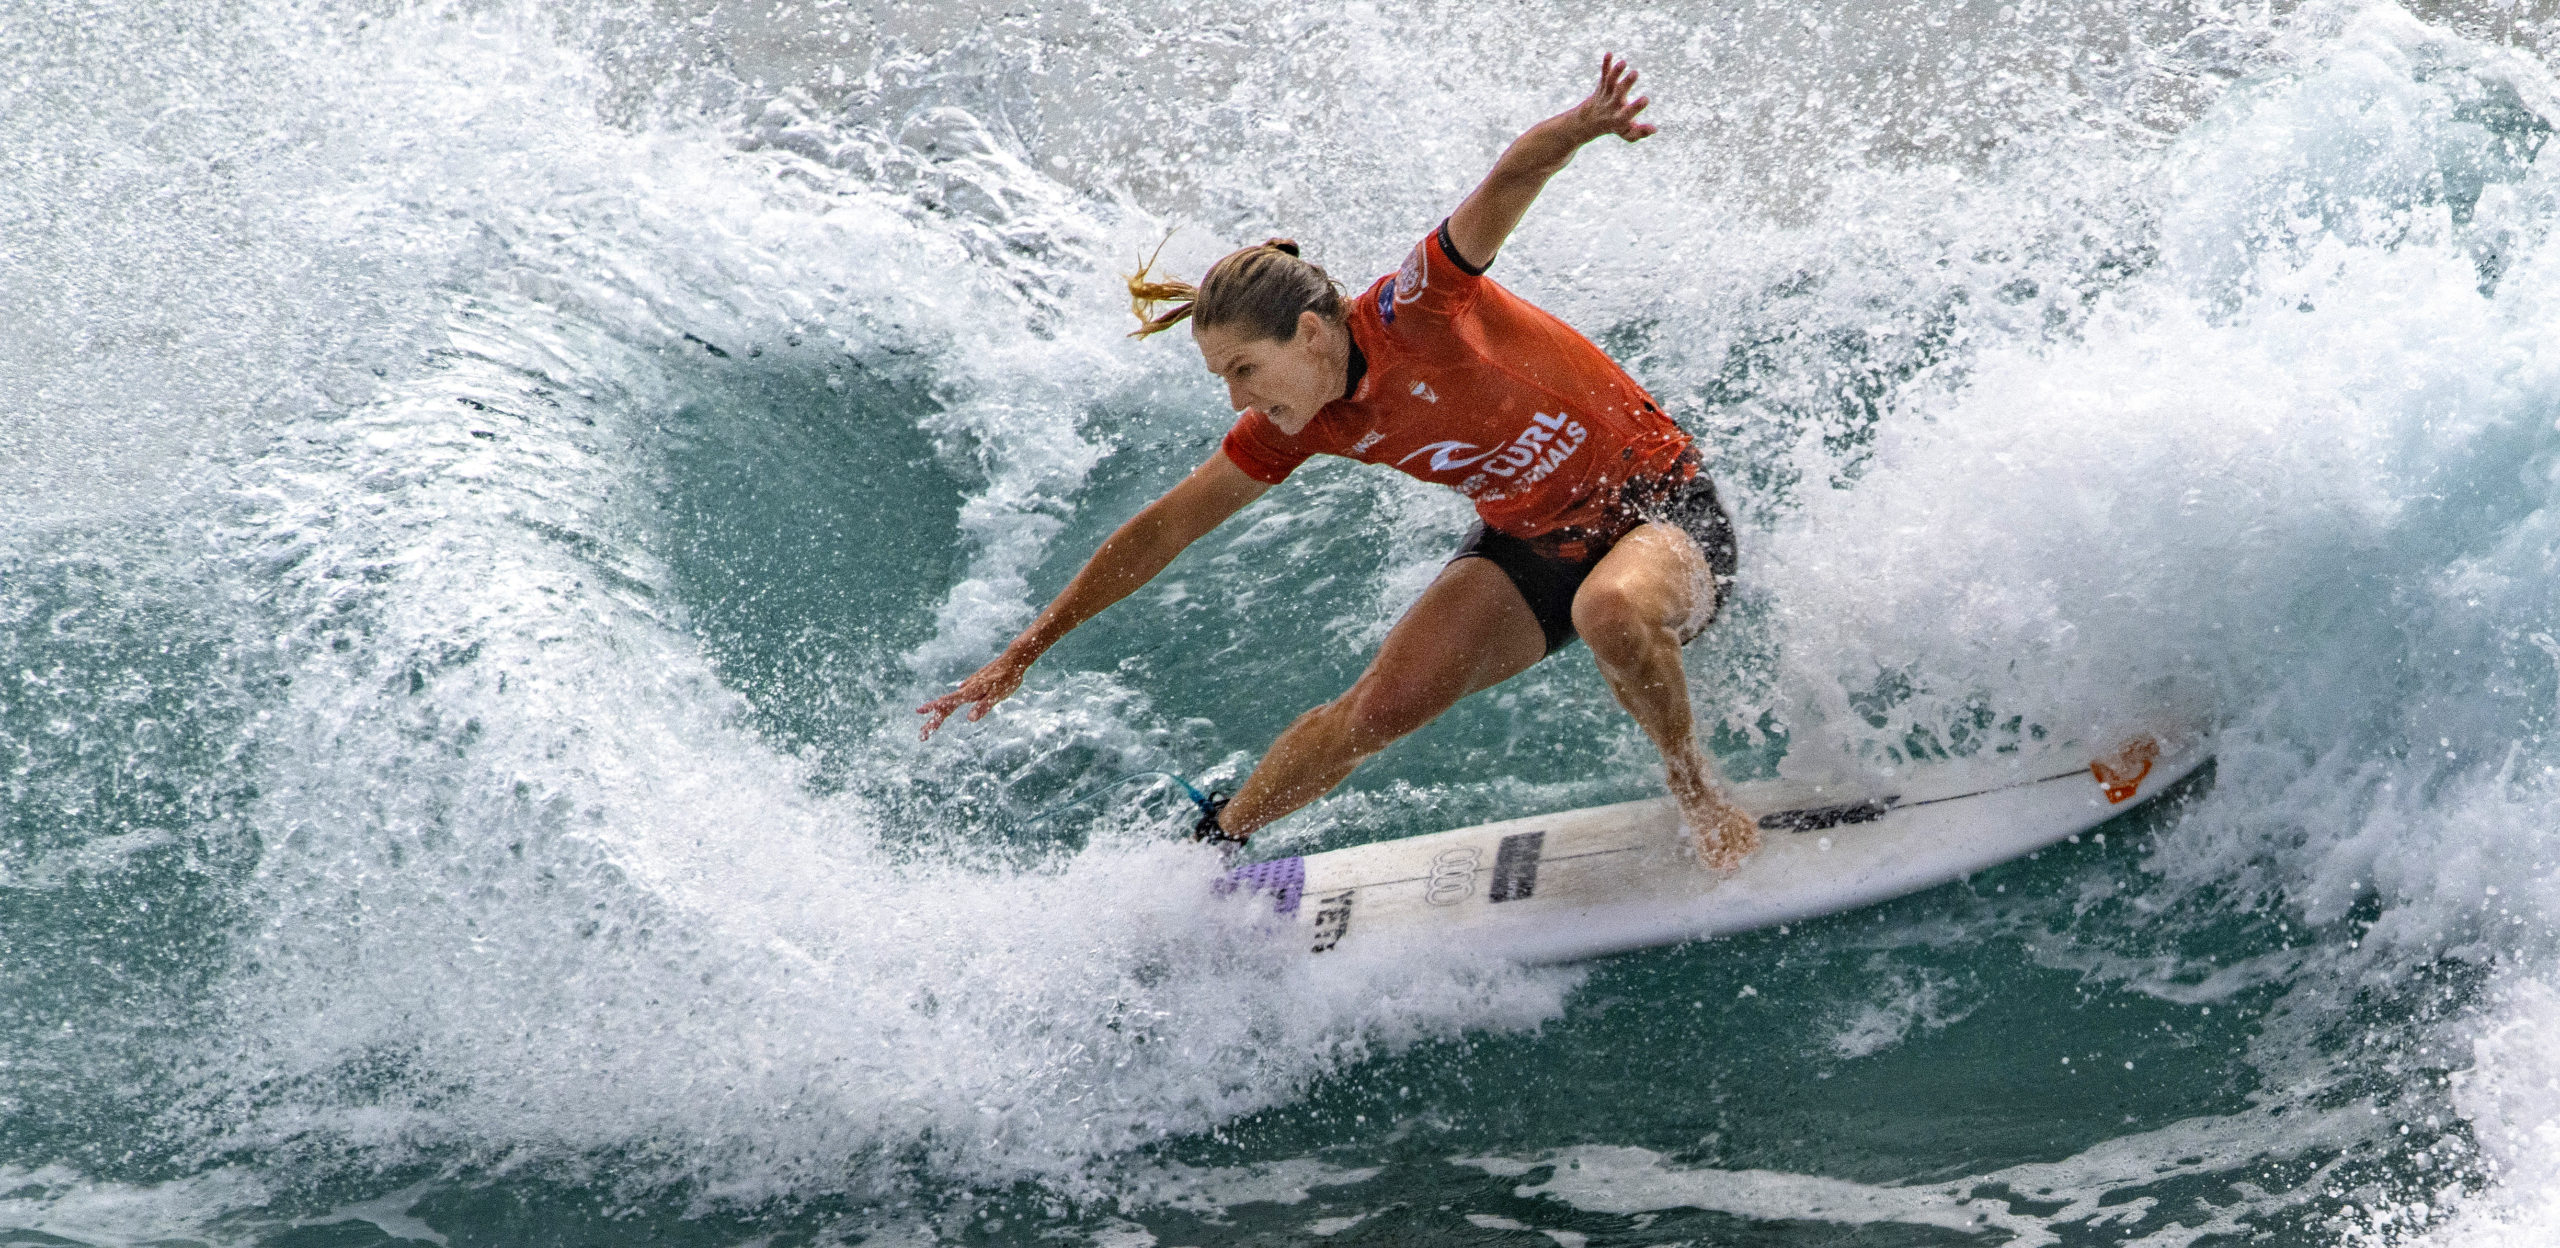 San Clemente, CA - September 08: Stephanie Gilmore of Australia surfs during the final at the Rip Curl WSL Finals against Carissa Moore of Hawaii, at Lower Trestles at San Onofre State Park in San Clemente on Thursday, September 8, 2022. Gilmore won her eighth world championship. (Photo by Mark Rightmire/MediaNews Group/Orange County Register via Getty Images)